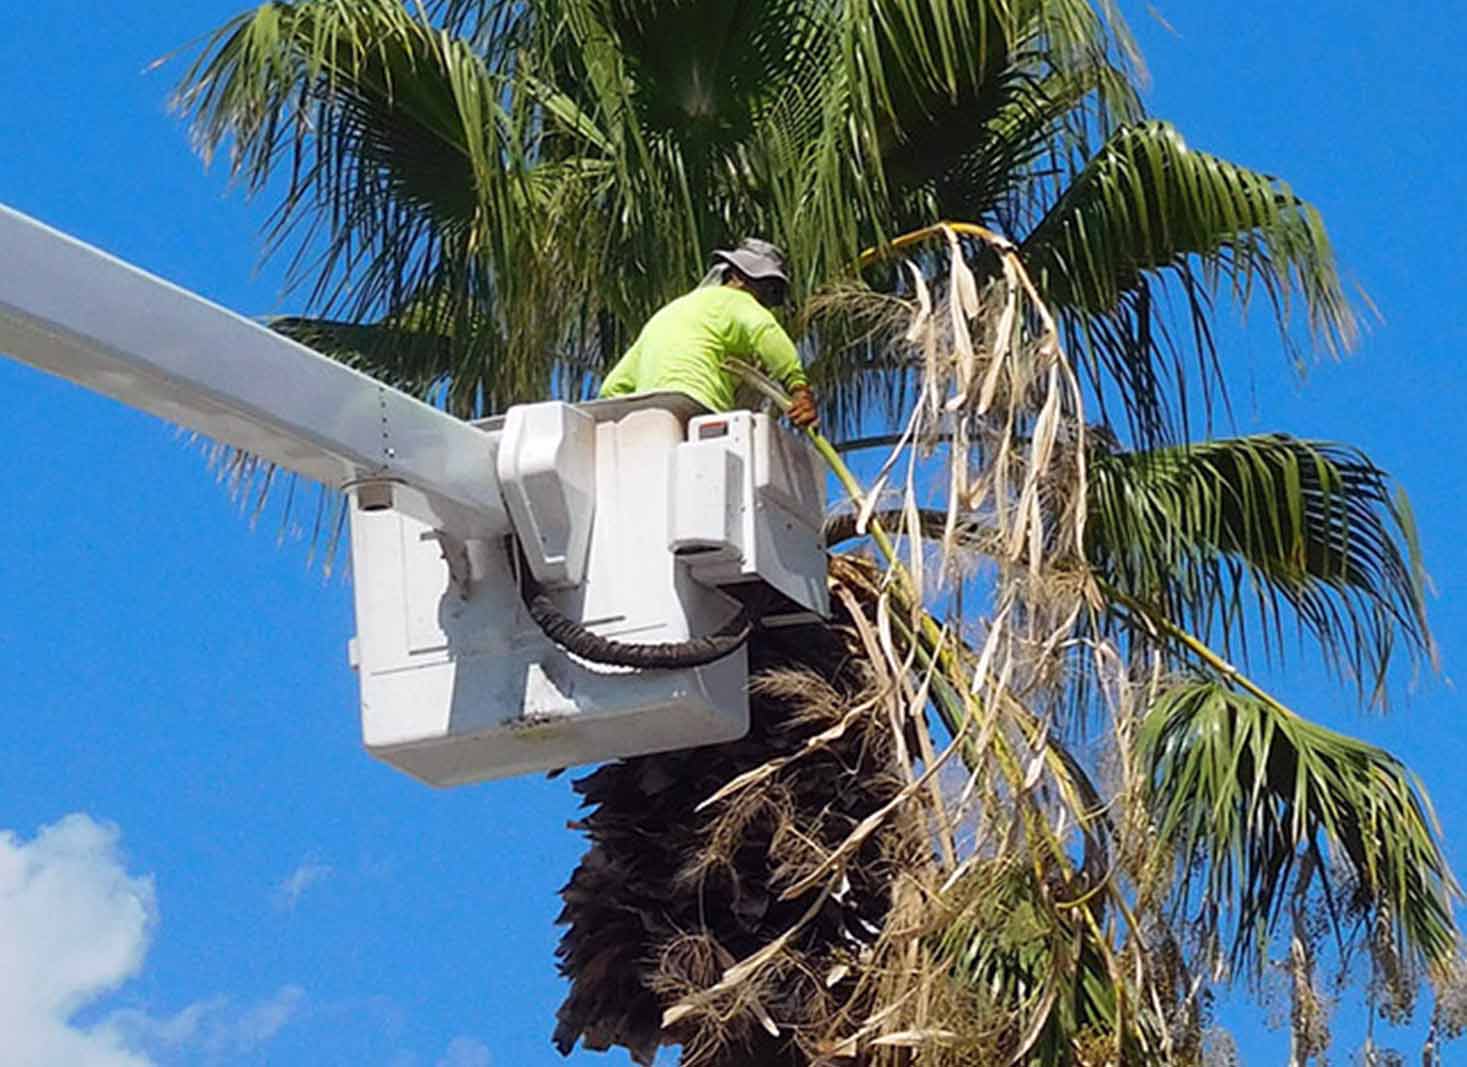 Queen Palm removal